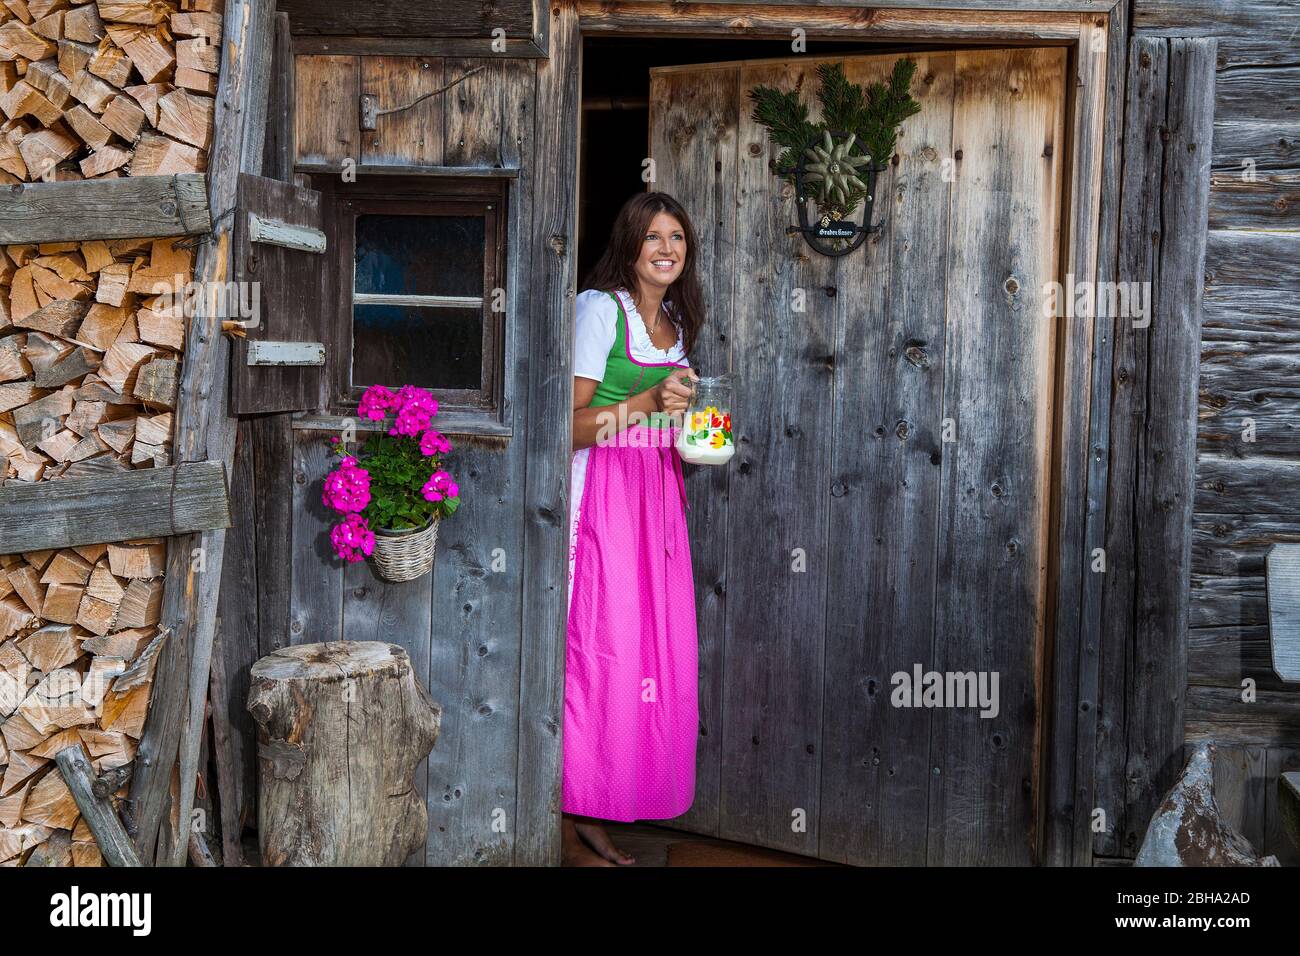 Icyllic Bavaria, young woman in dirndl dress with milk jug at the entrance of a hut Stock Photo